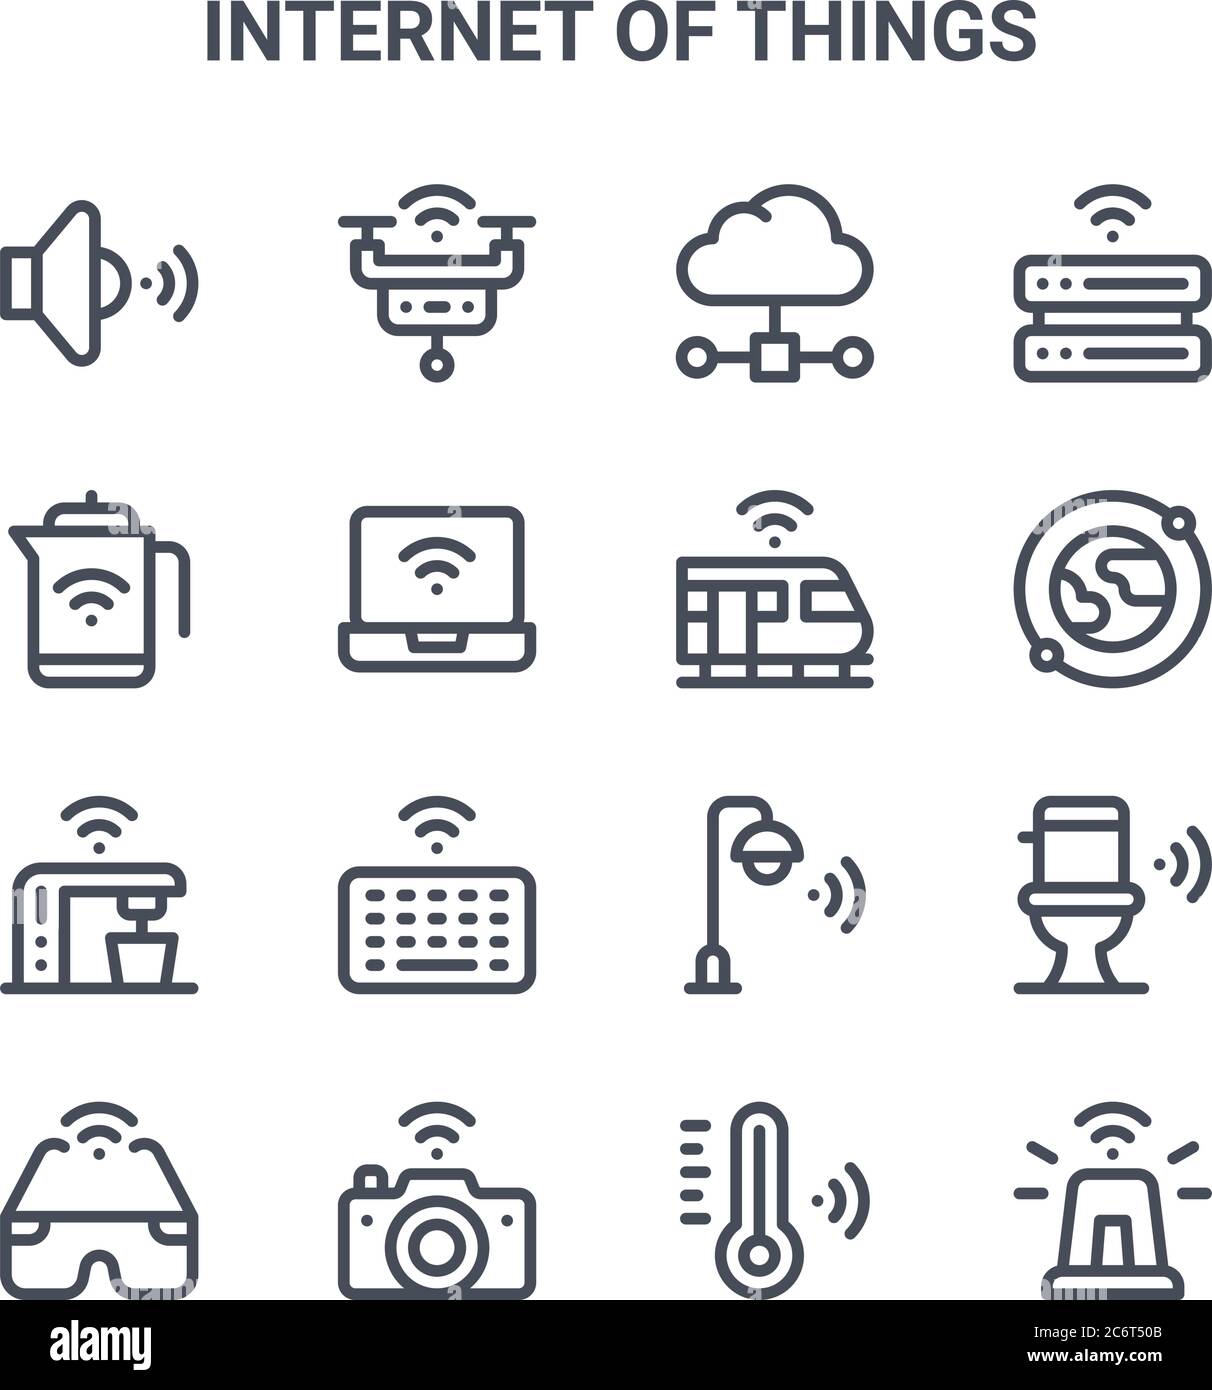 set of 16 internet of things concept vector line icons. 64x64 thin stroke icons such as smart drone, kettle, satellite, street light, camera, siren, s Stock Vector